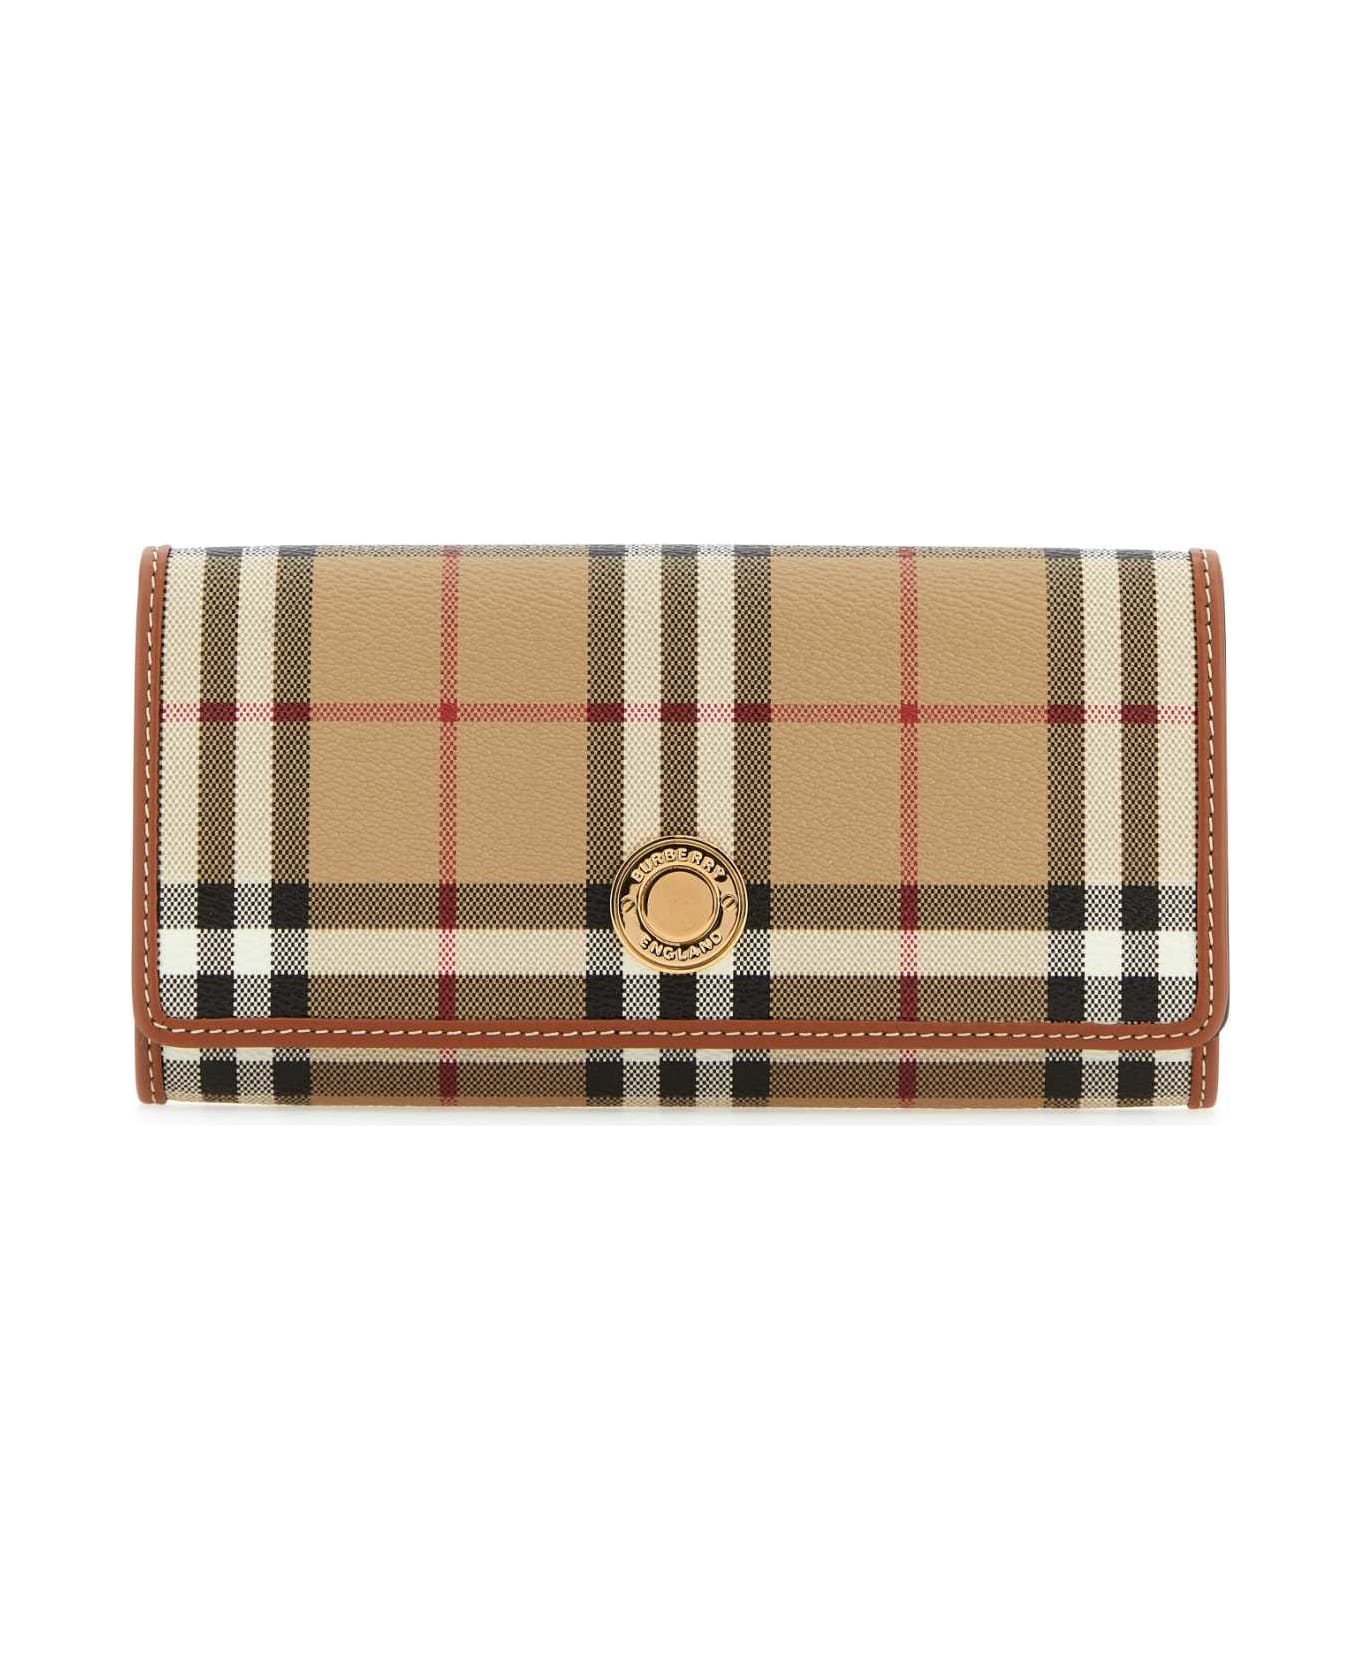 Burberry Printed Canvas And Leather Continental Wallet - ARCHIVEBEIGE